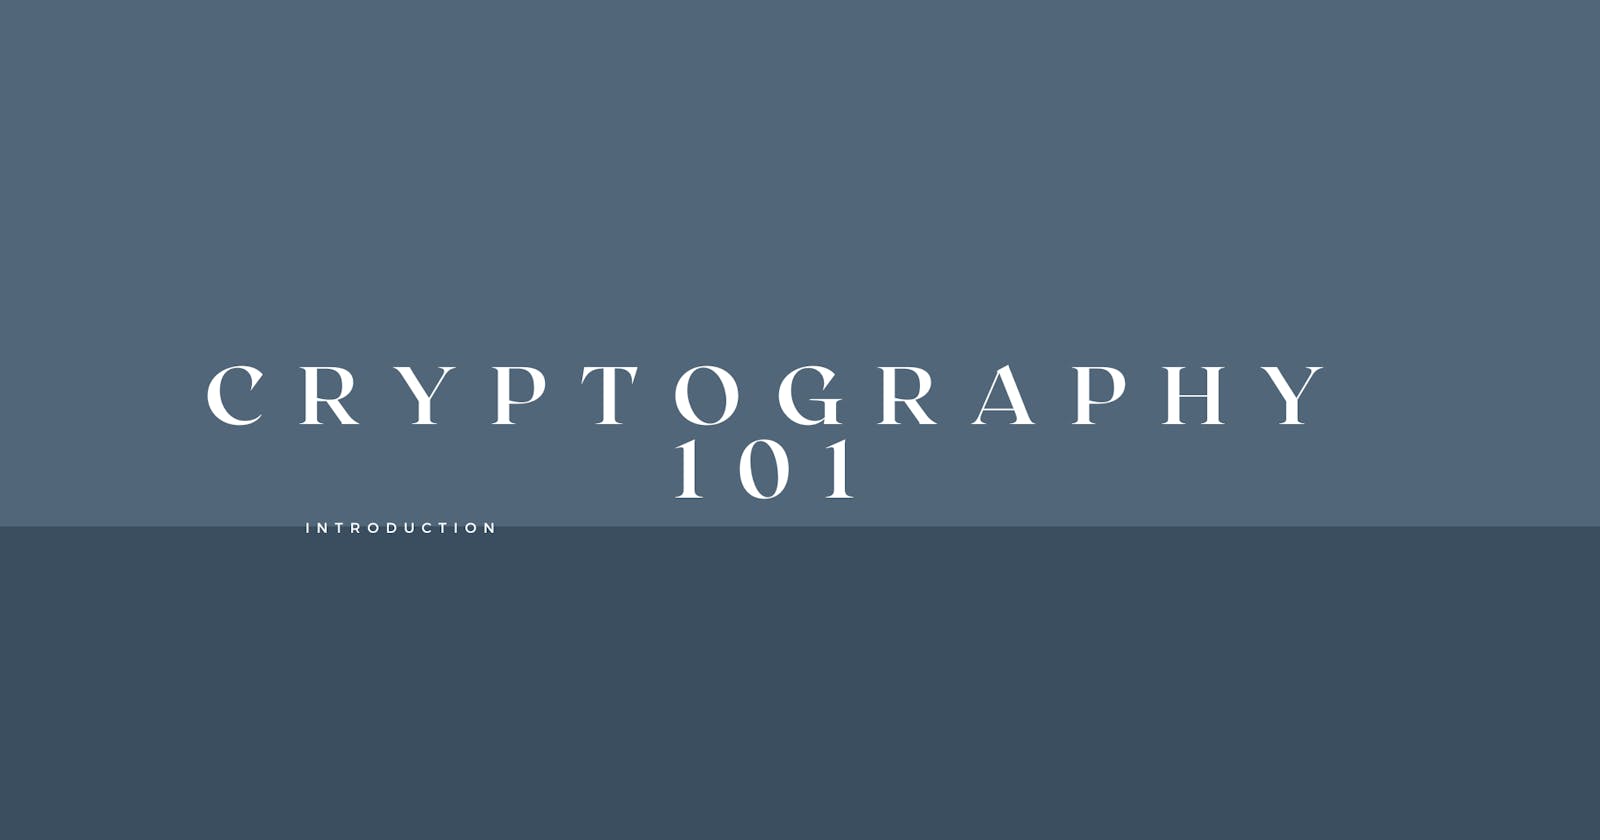 Cryptography 101